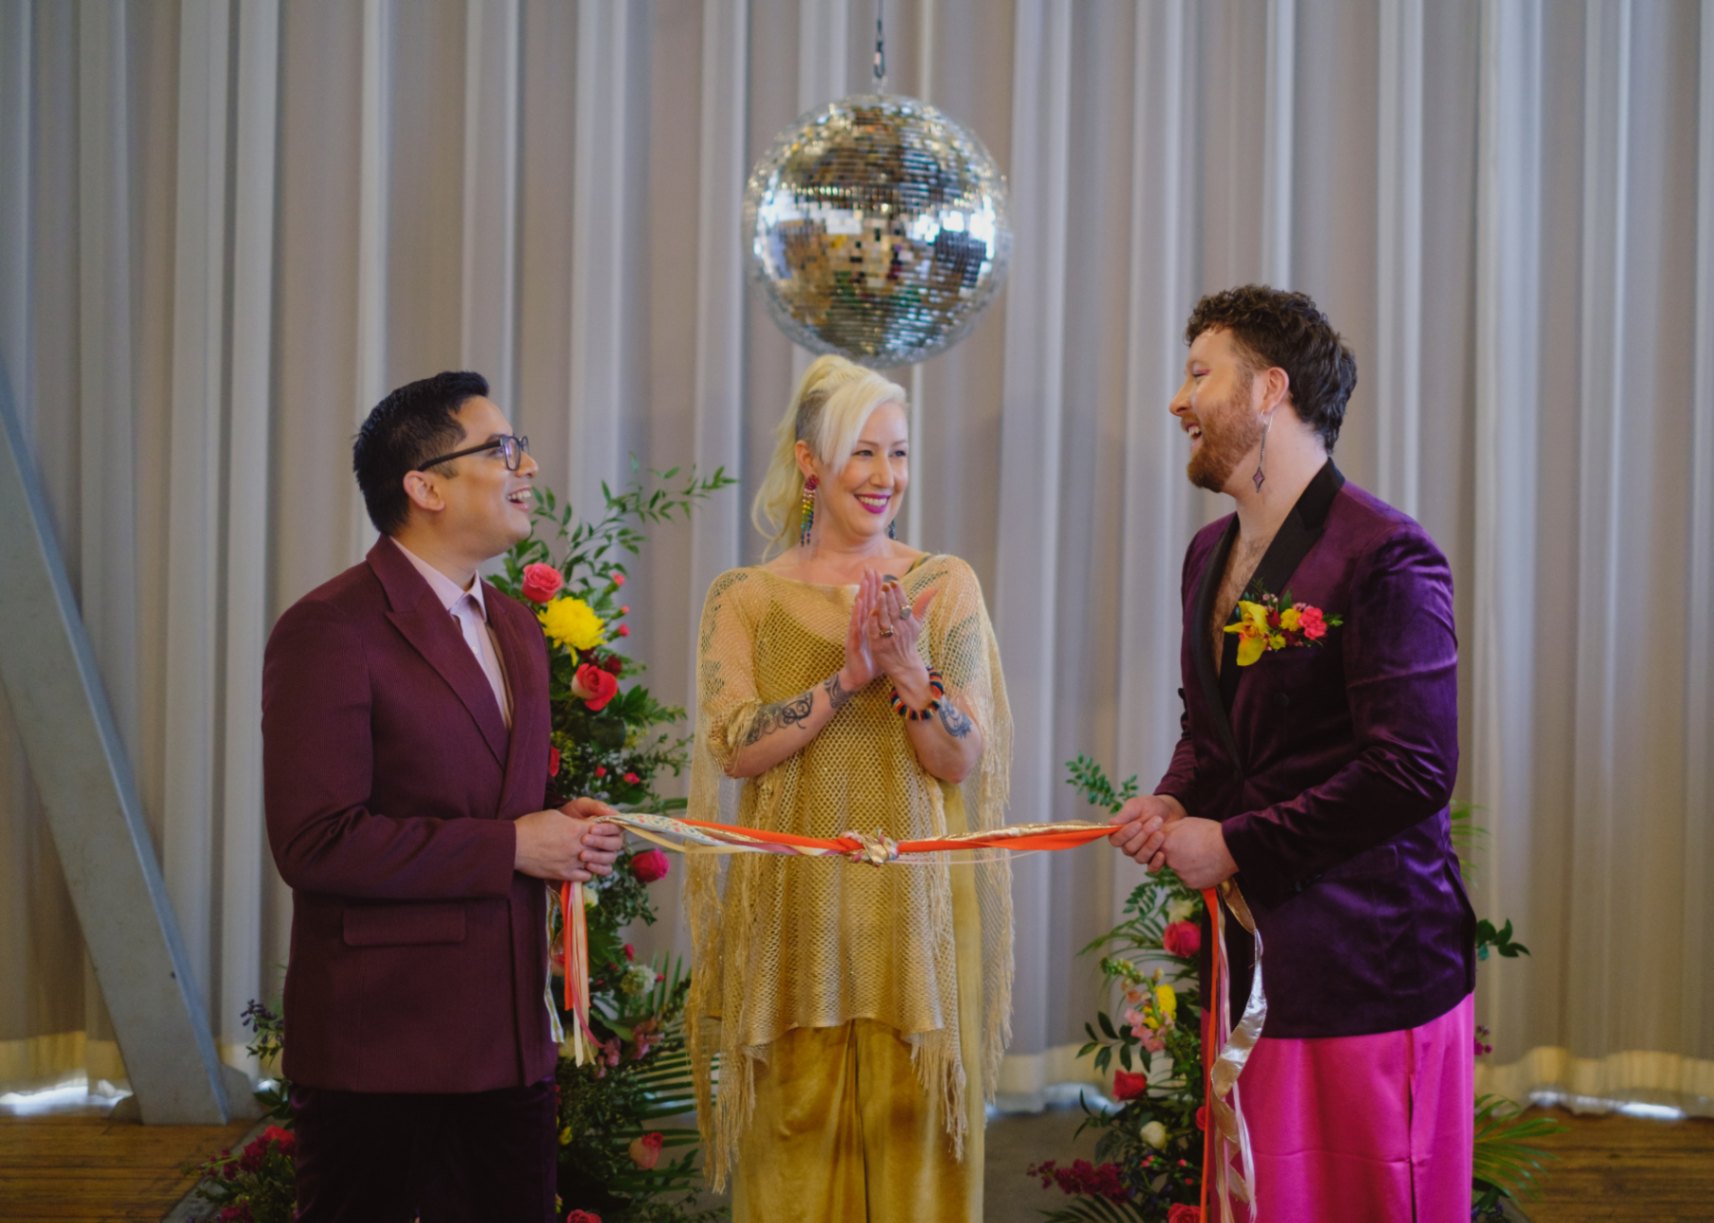 Wedding inspiration for queer love in Seattle with handfasting, a disco ball and vegan donuts